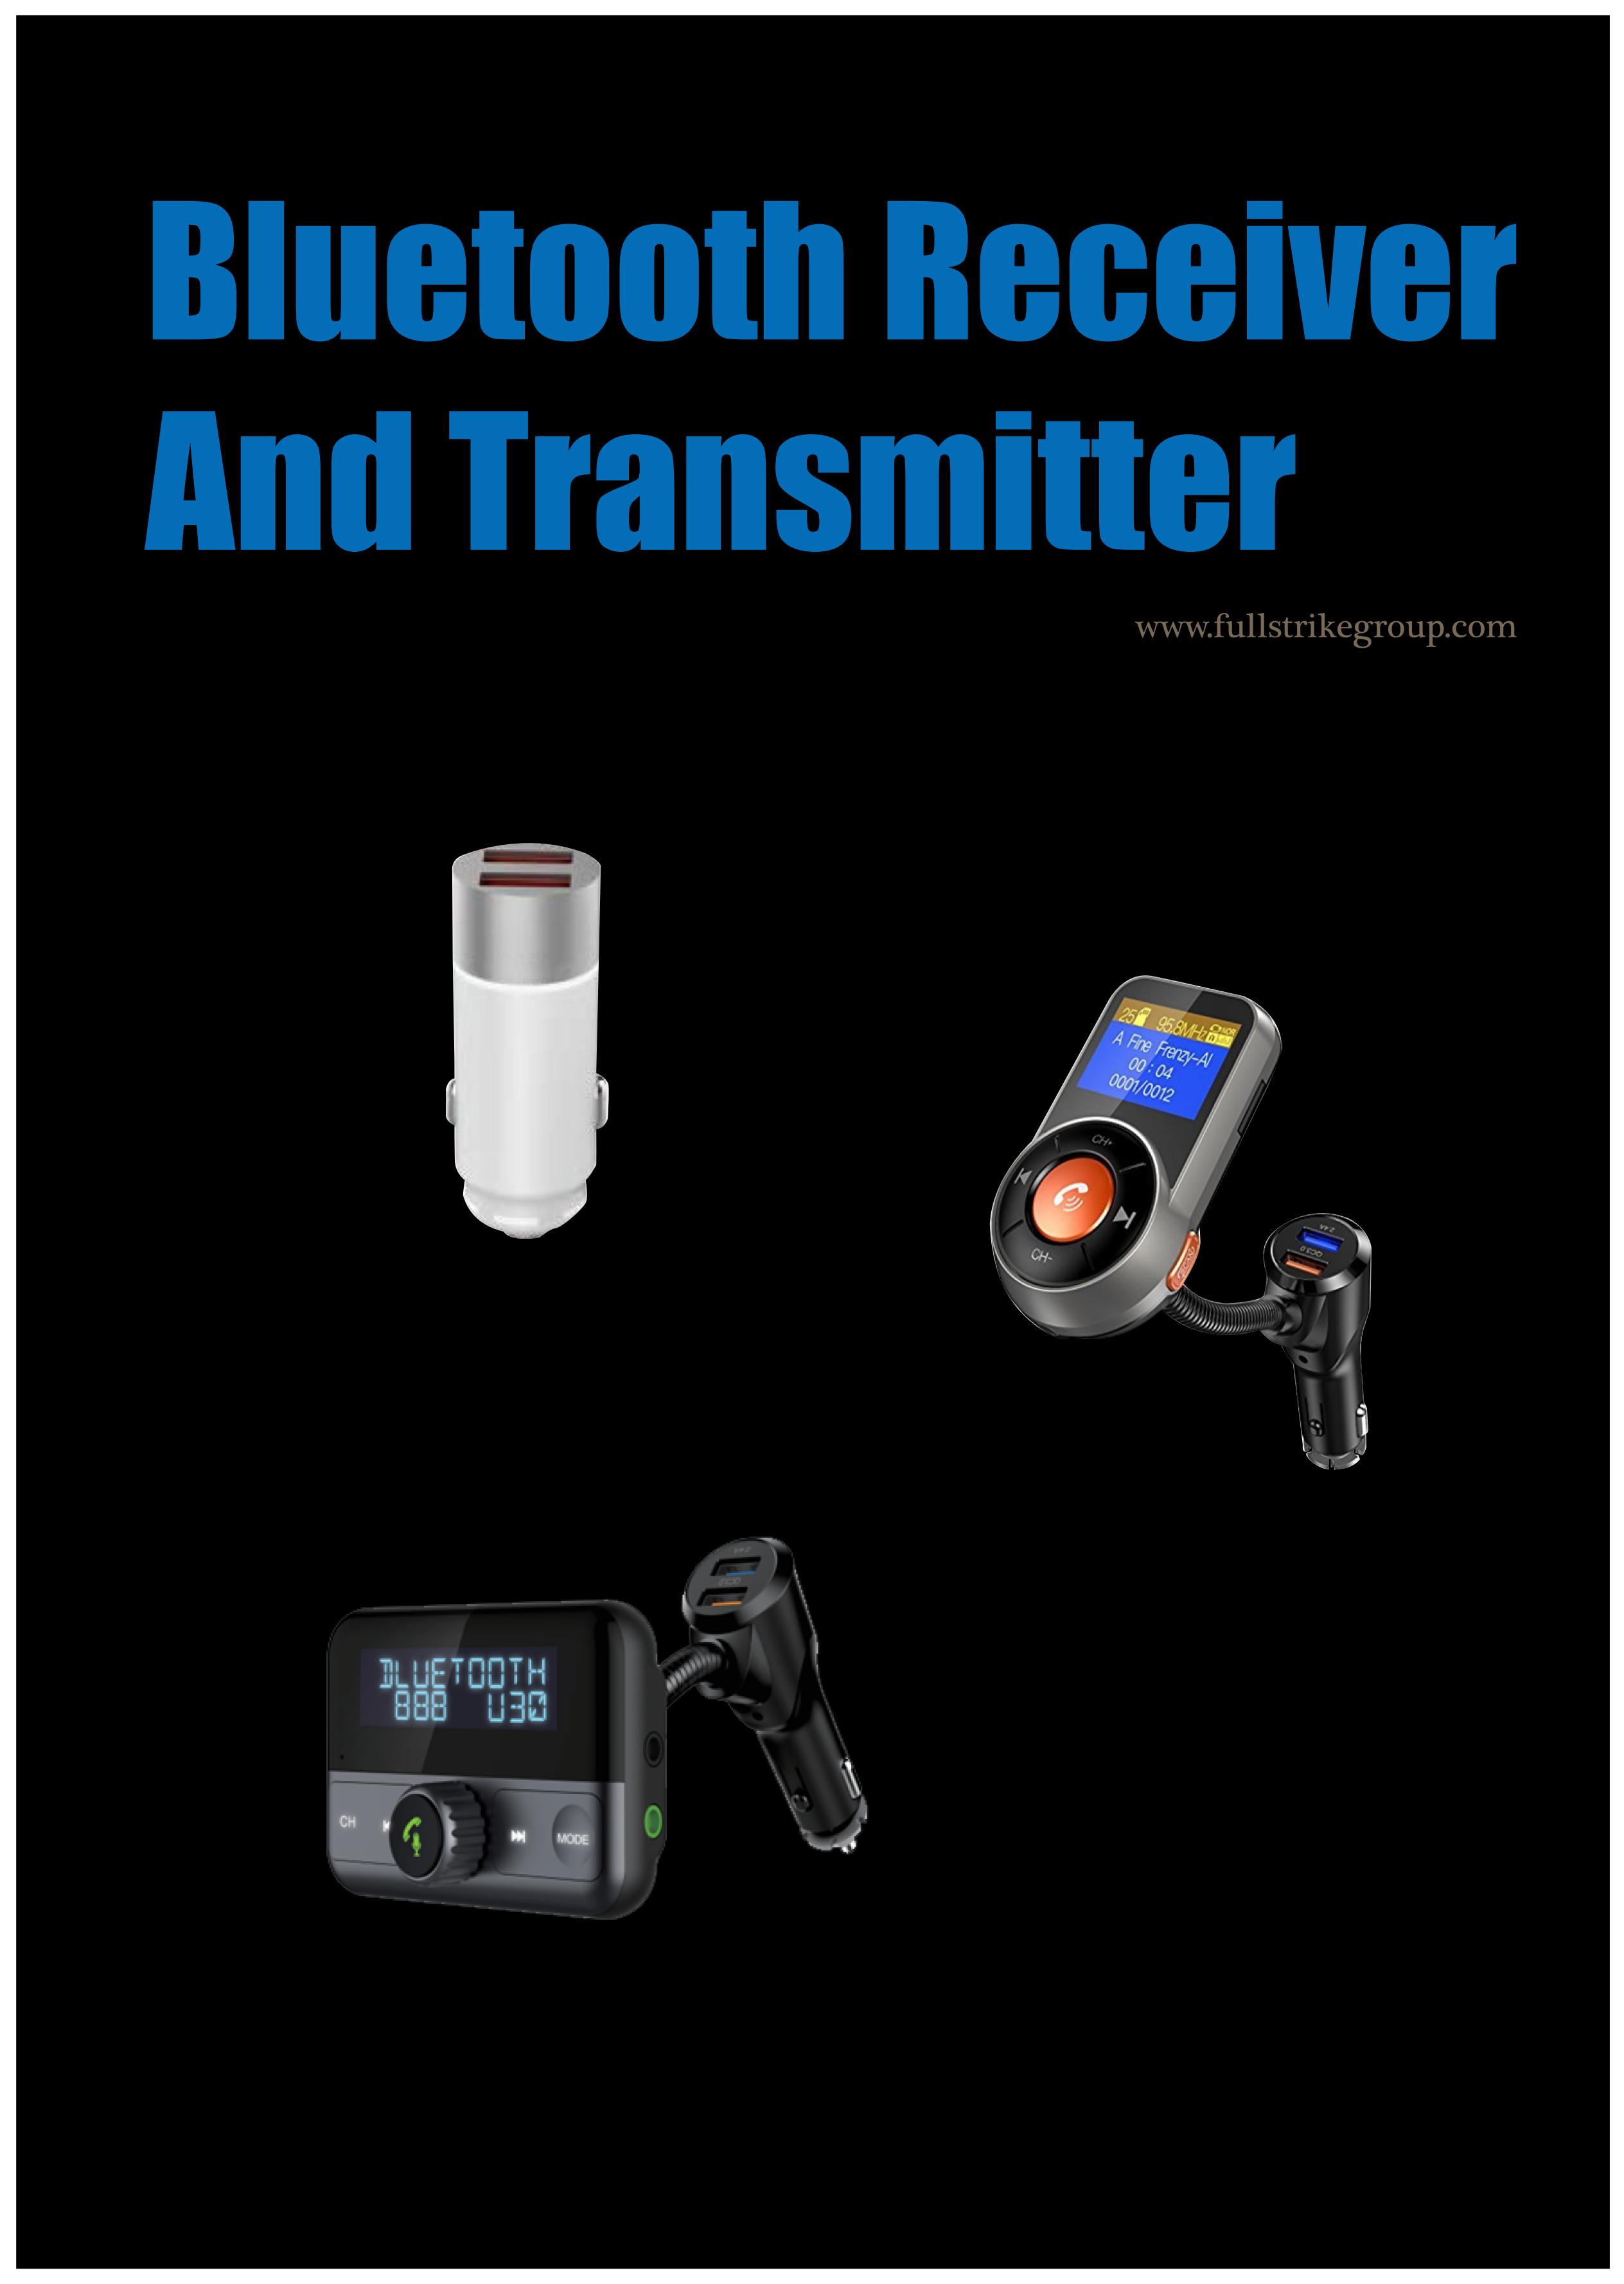 full strike,bluetooth receiver and transmitter,group